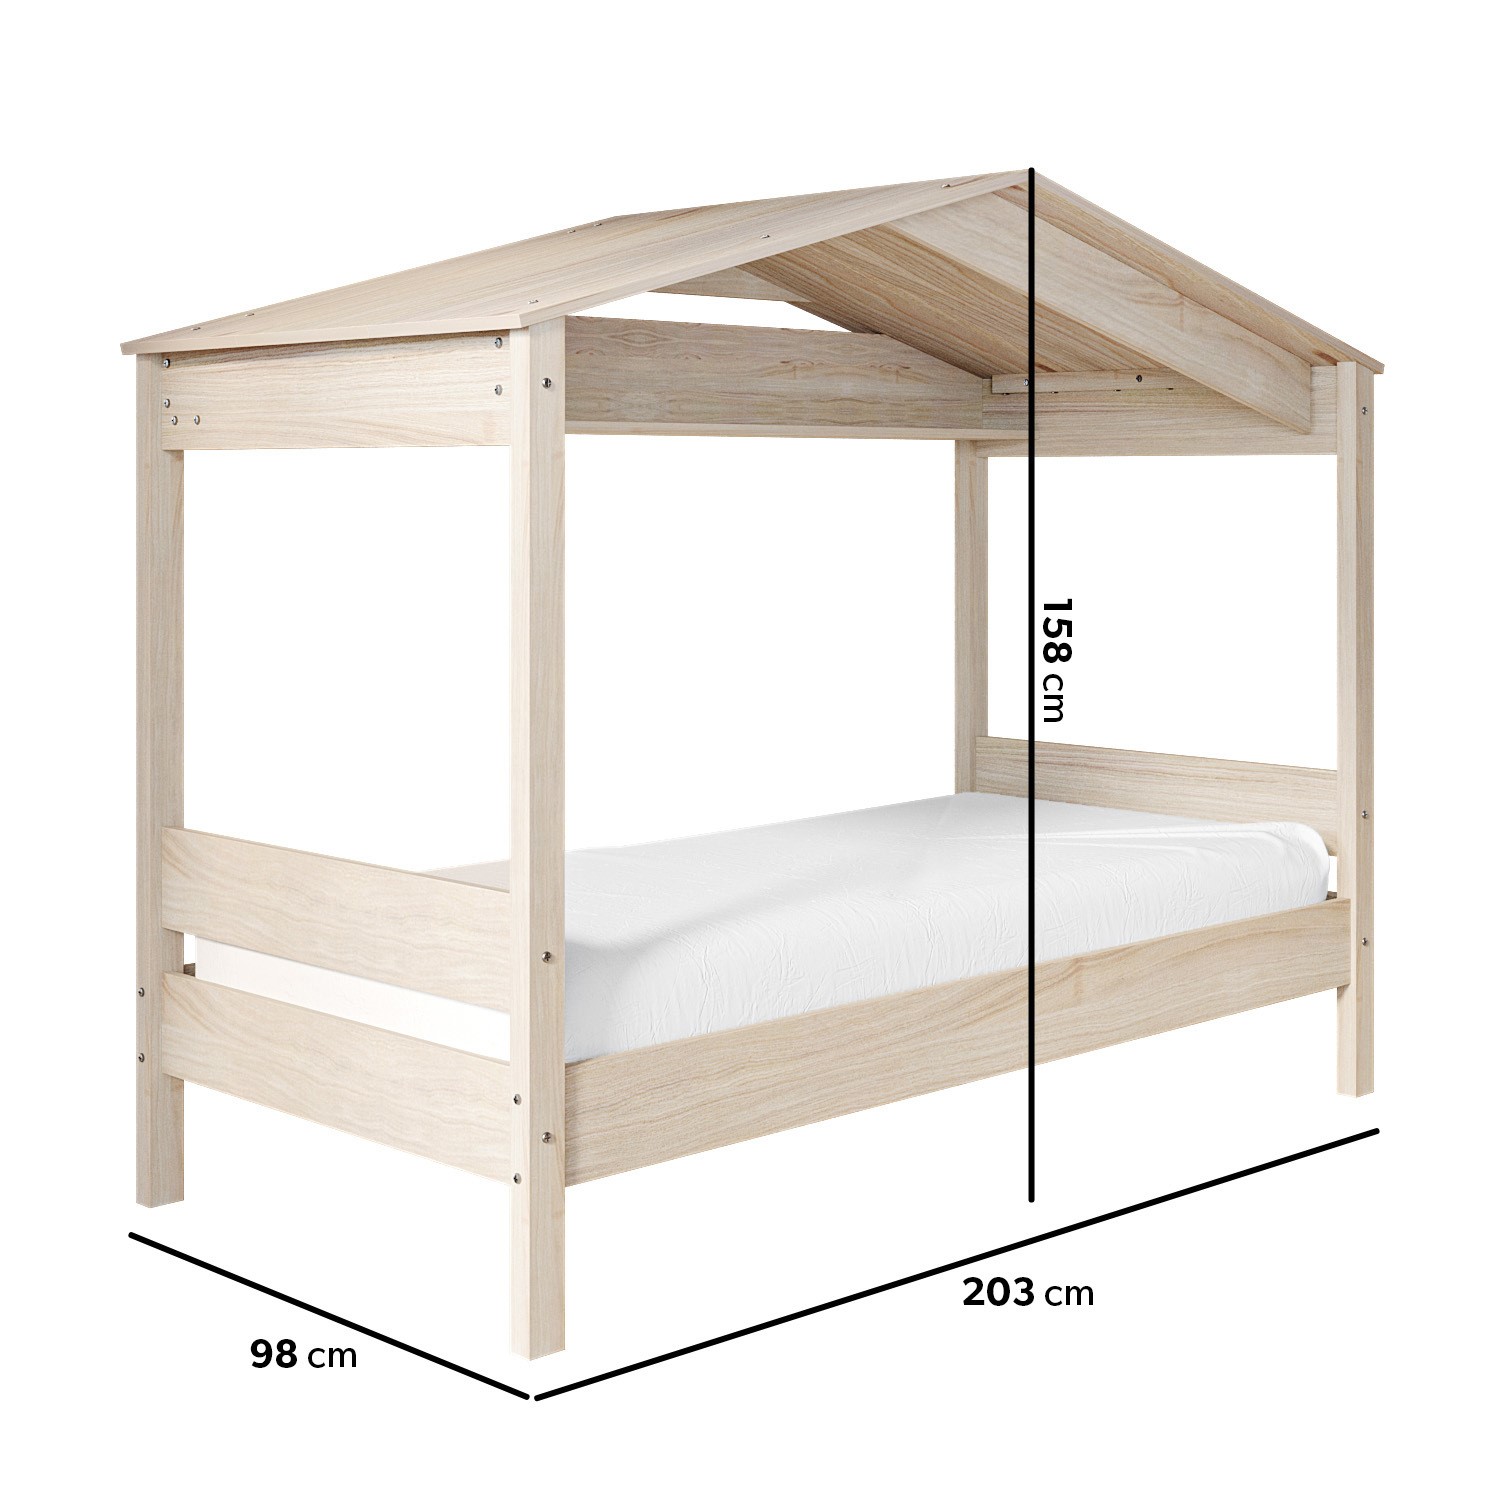 Read more about Single house bed frame in pine remy